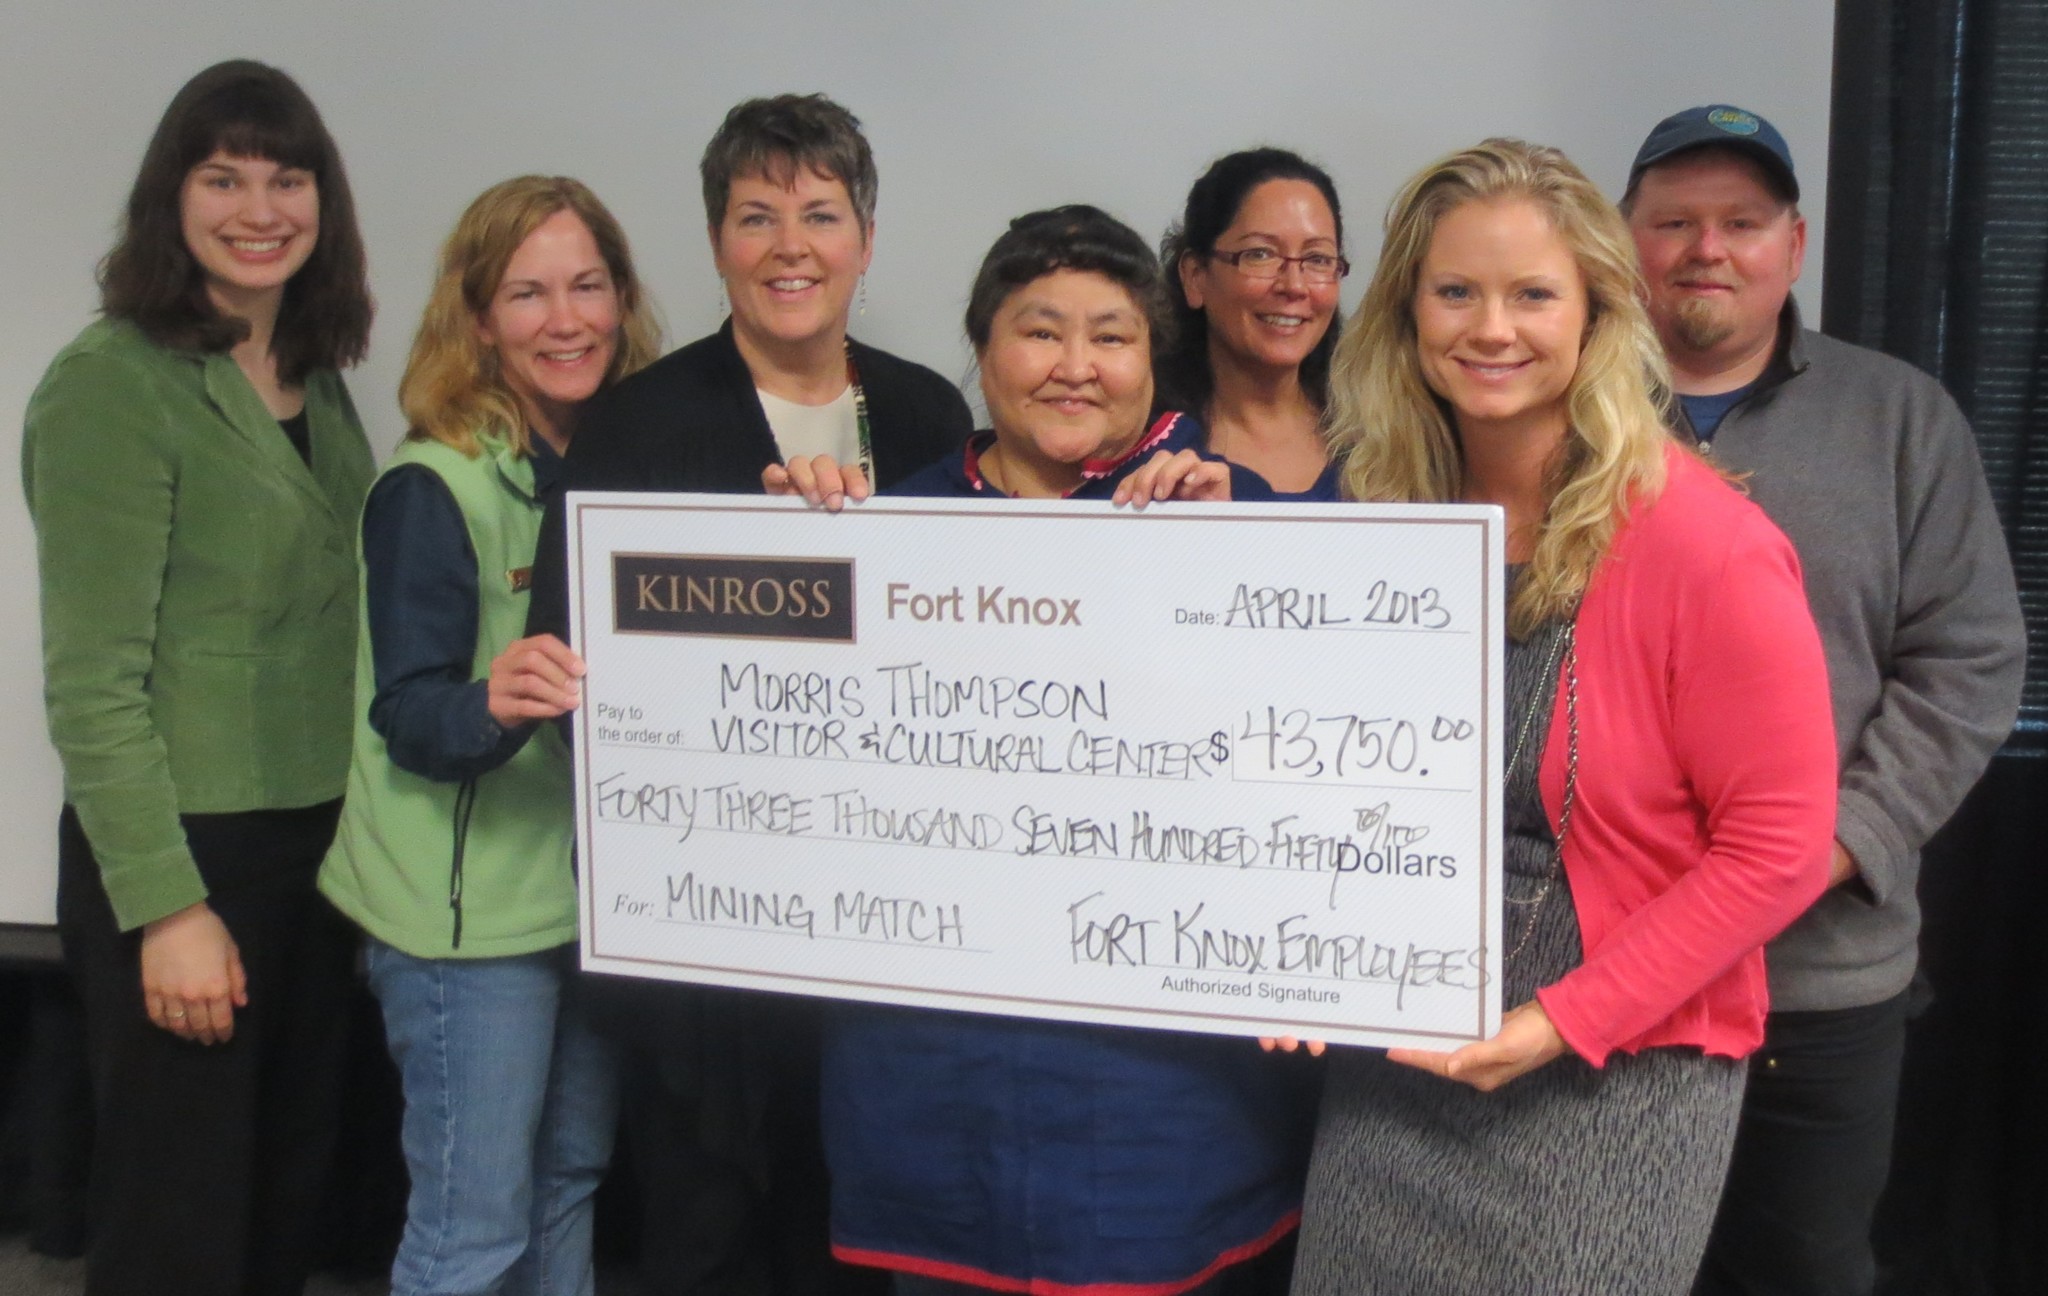 Anna Atchison (far right), Government Relations Manager, presents Kinross Fort Knox's mining match gift to the campaign. 